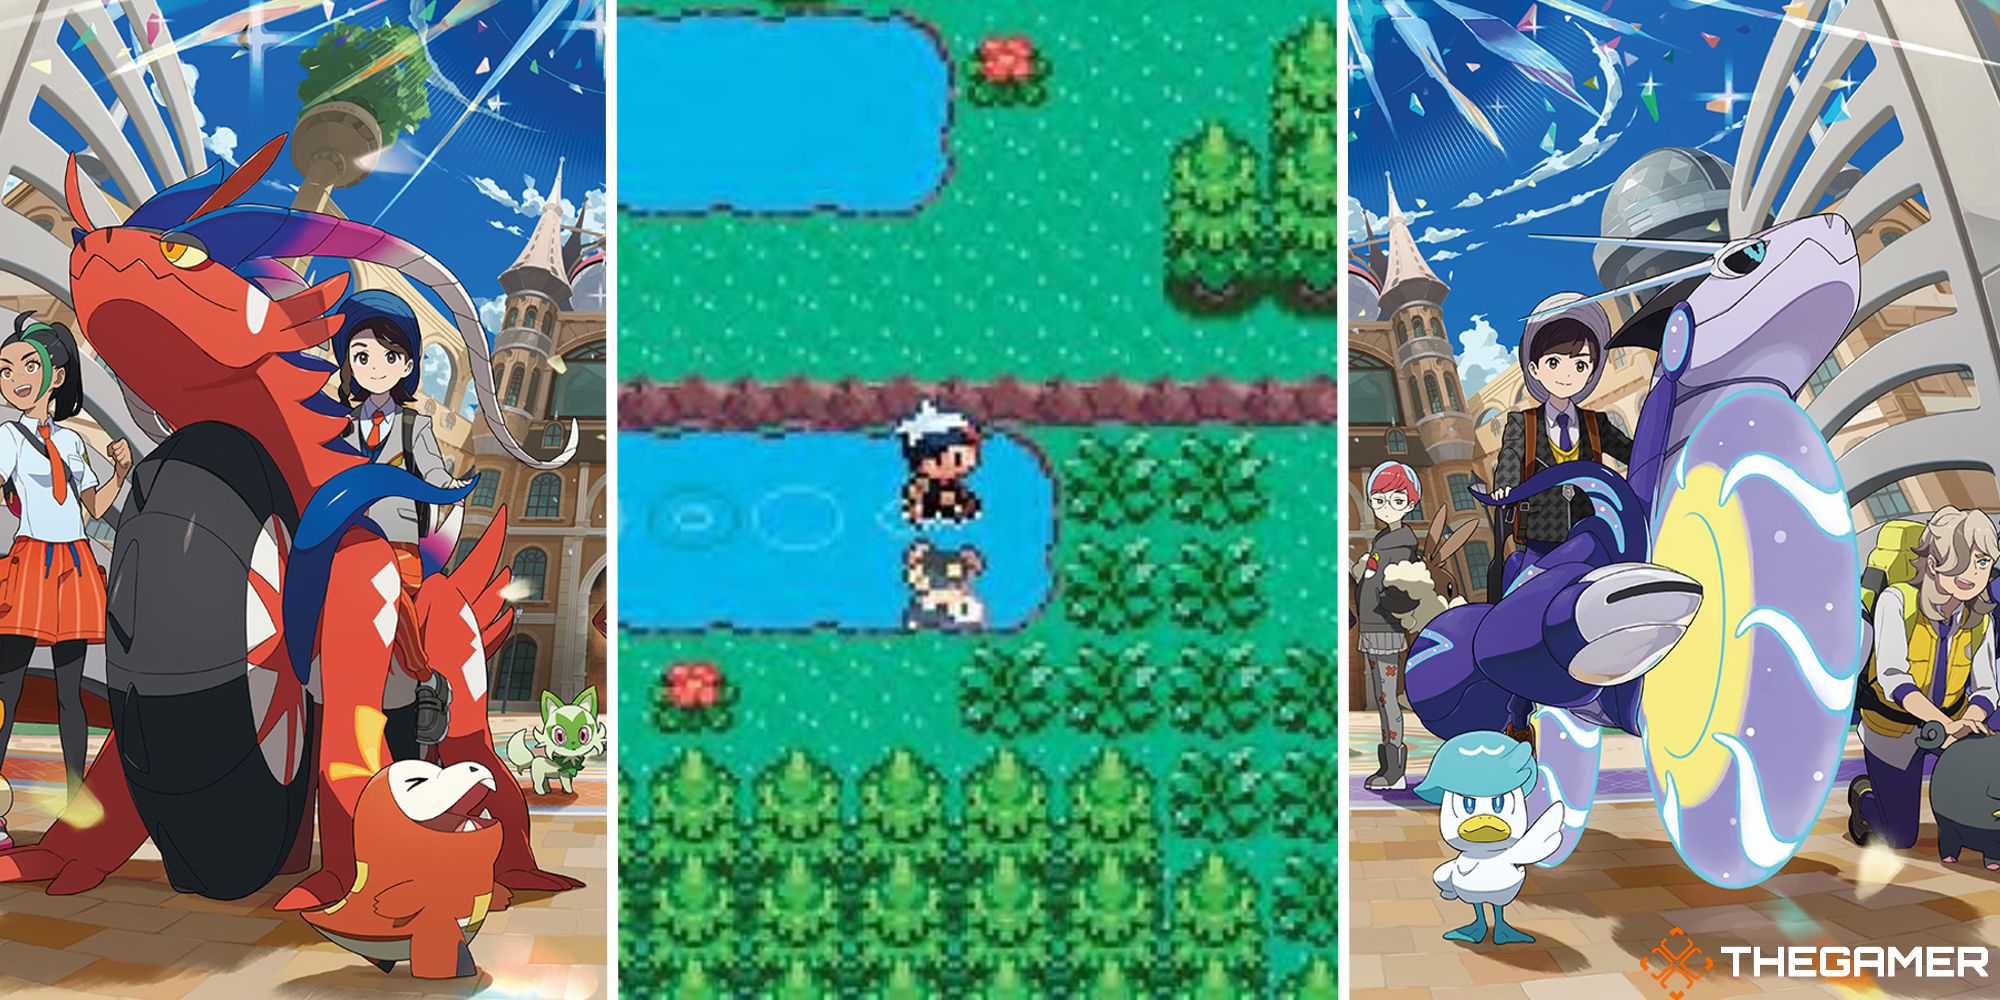 split image showing pokemon ruby gameplay spliced into picture of scarlet and violet official art